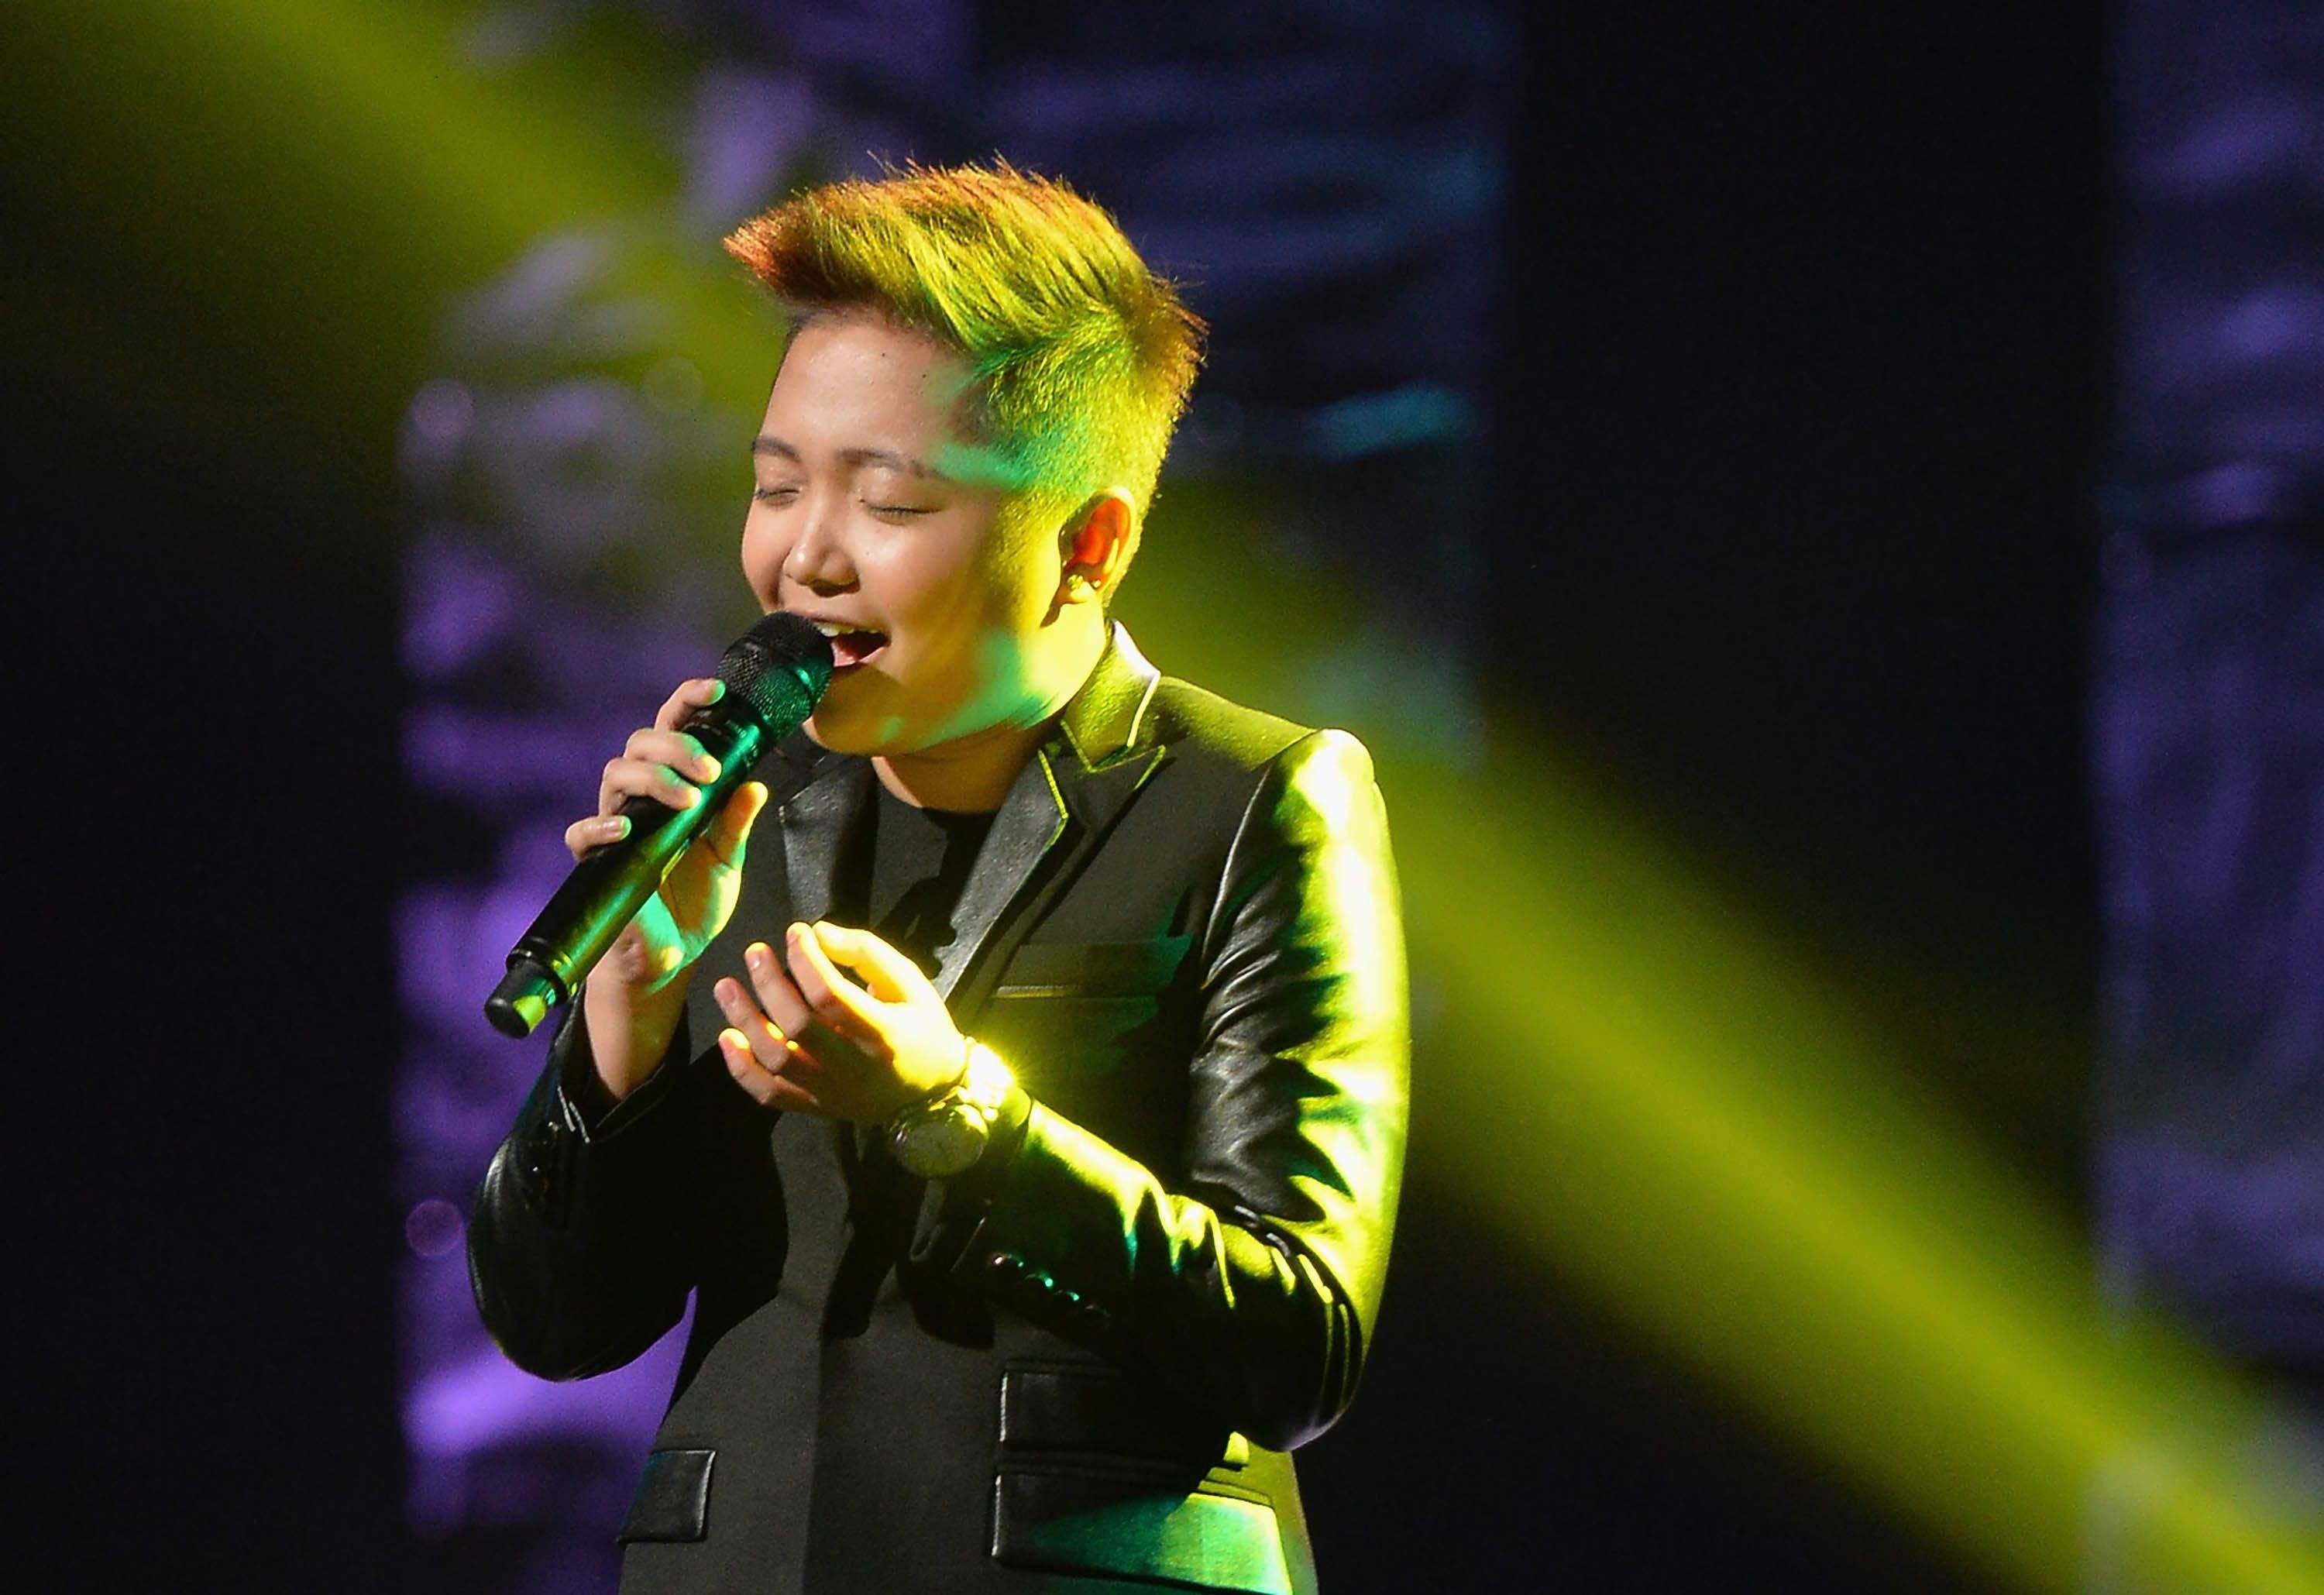 23-surprising-facts-about-jake-zyrus-aka-charice-pempengco